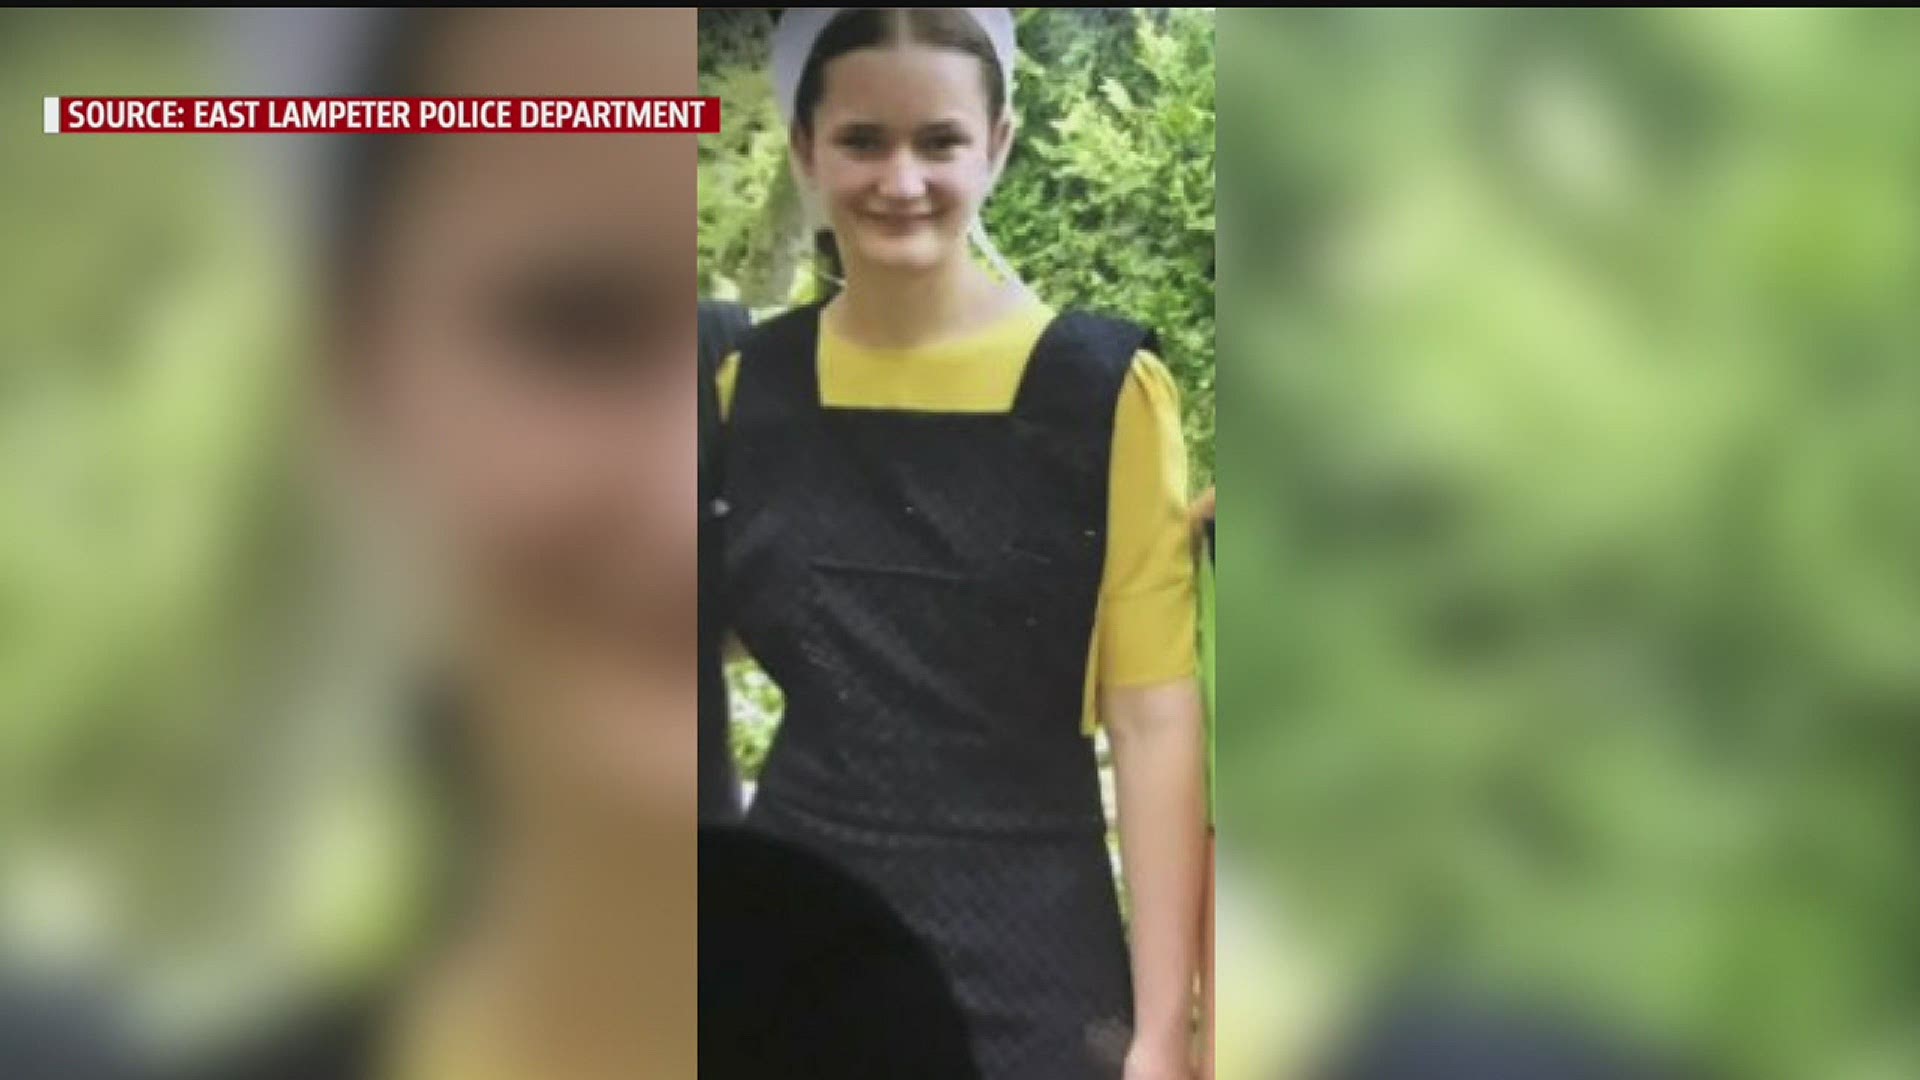 Search efforts continue to find 18-year-old Linda Stoltzfoos in East Lampeter Township.